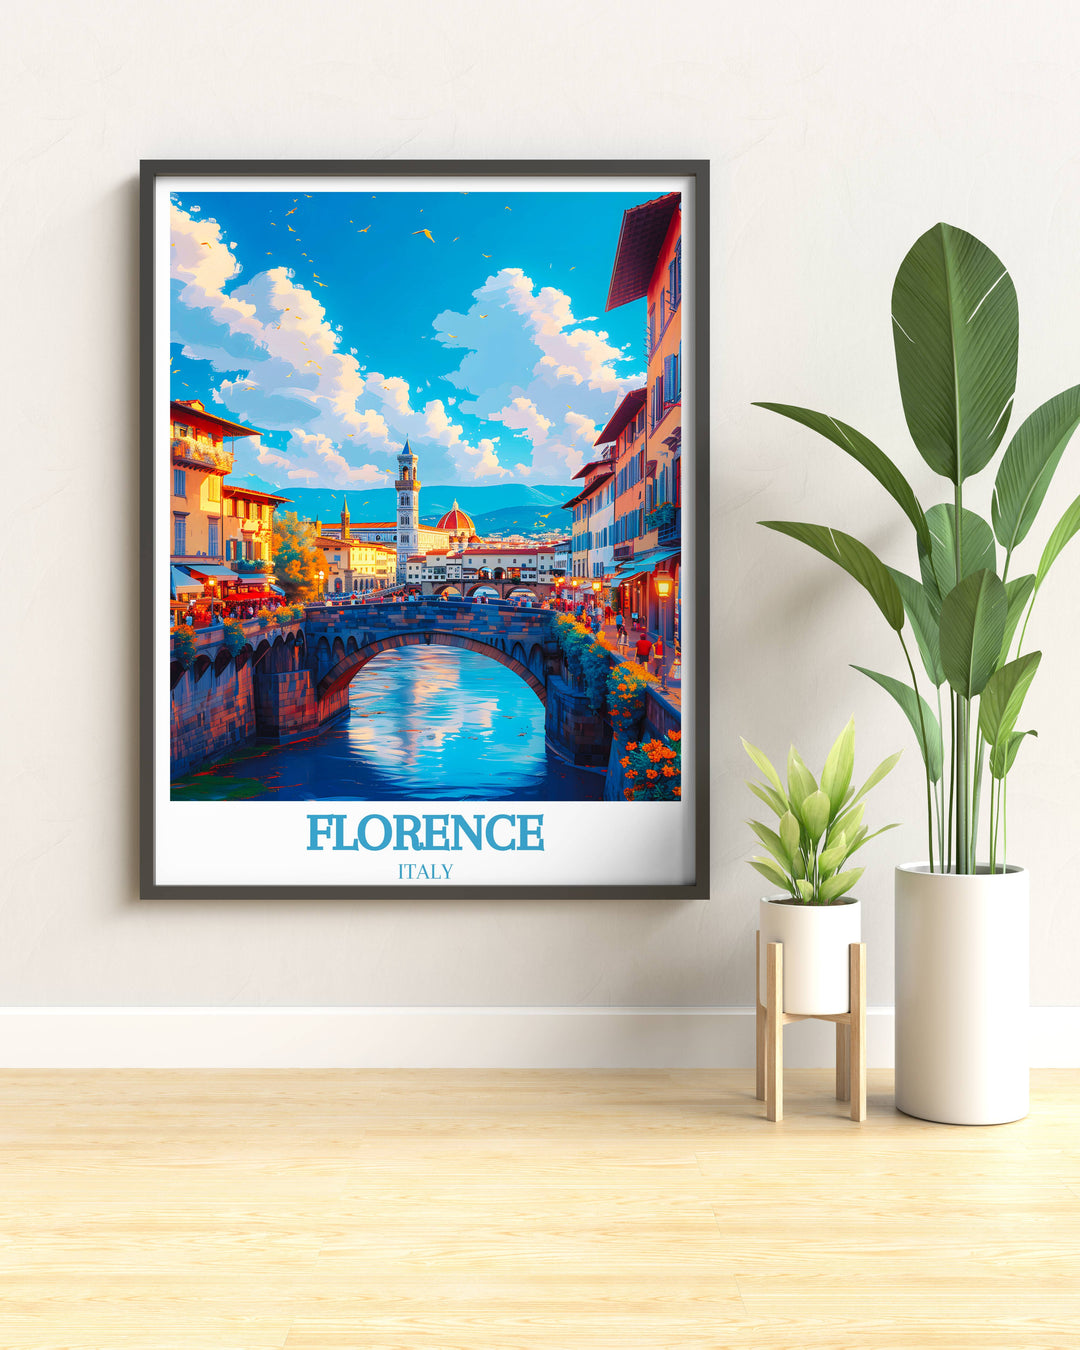 Ponte Vecchio under winters snow offers a serene print option, ideal for those decorating with travel art that captures the landmarks timeless charm.